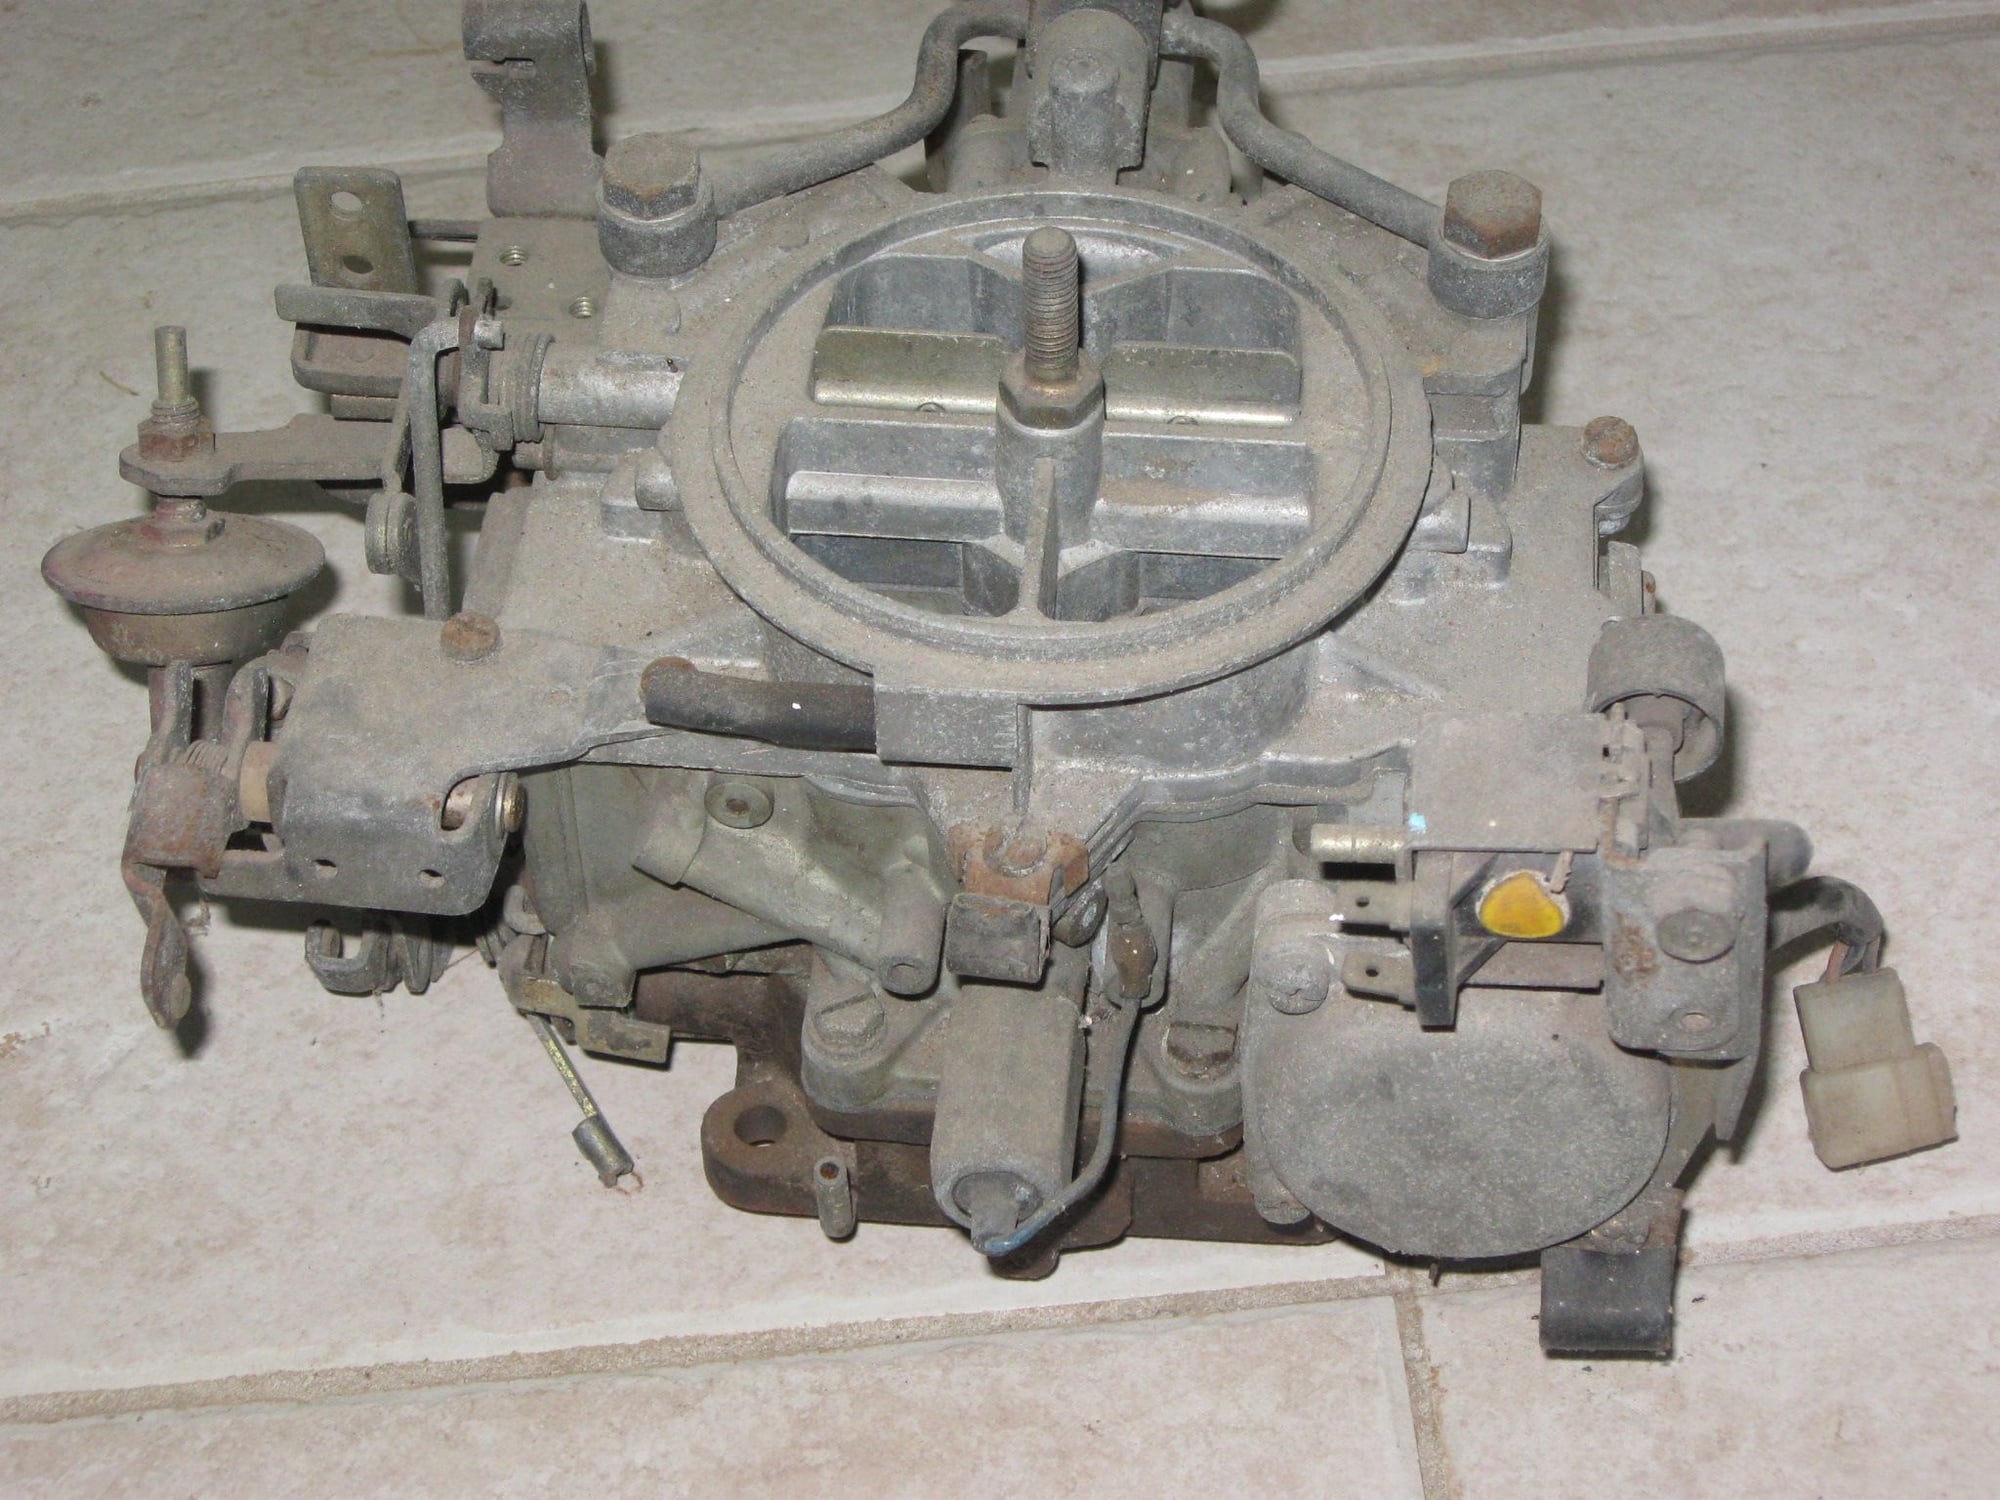 Engine - Intake/Fuel - 79 or 80 carb - Used - 1979 to 1980 Mazda RX-7 - Brenham, TX 77833, United States